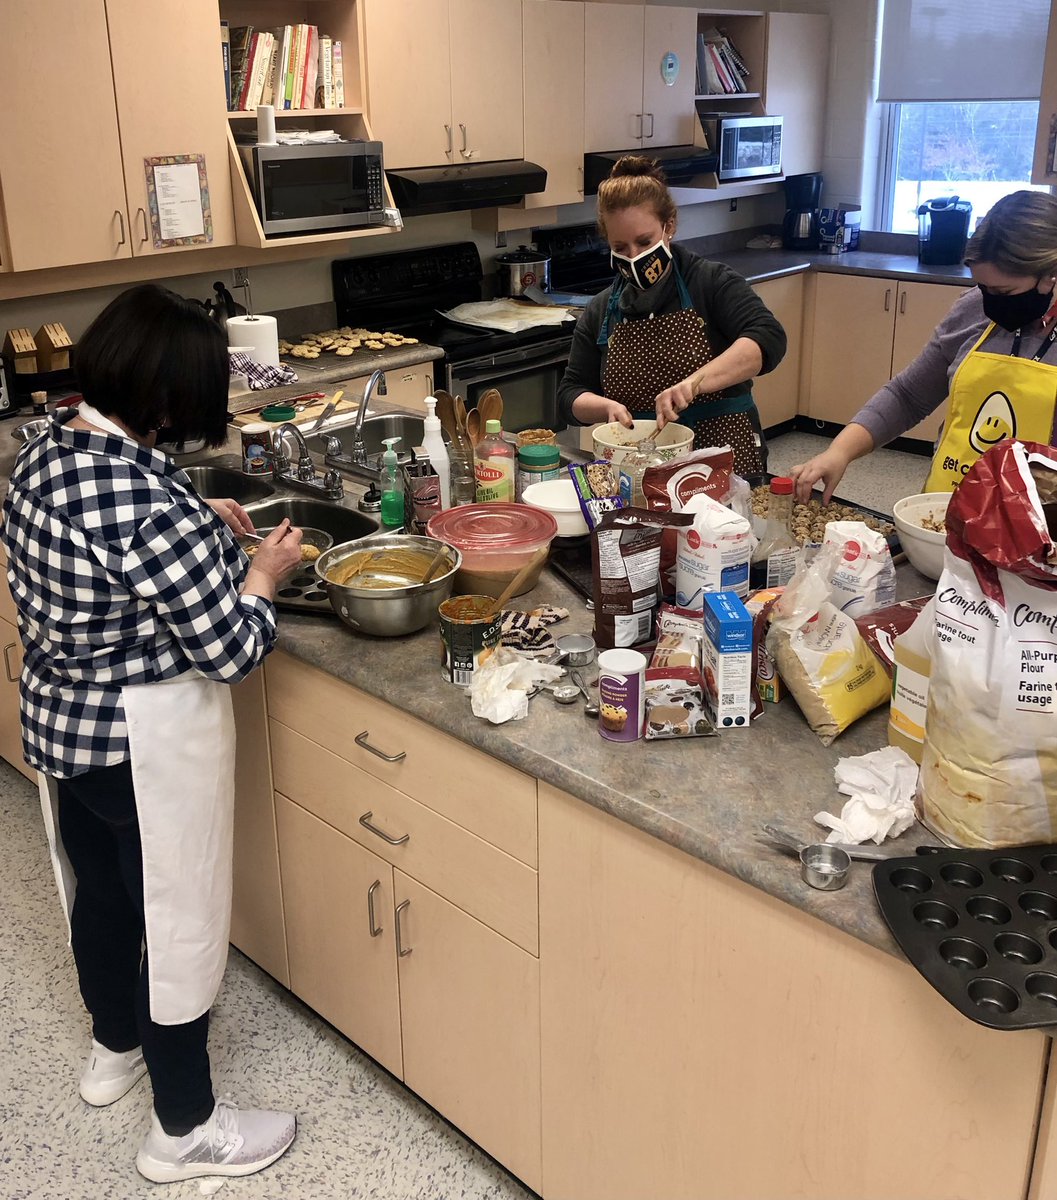 Members of our SRHS Wellness team took time during this Professional Learning Week to try new recipes and prepare snacks for the breakfast program and to fuel our kids during exam week #watchuslearn @TCRCE_NS